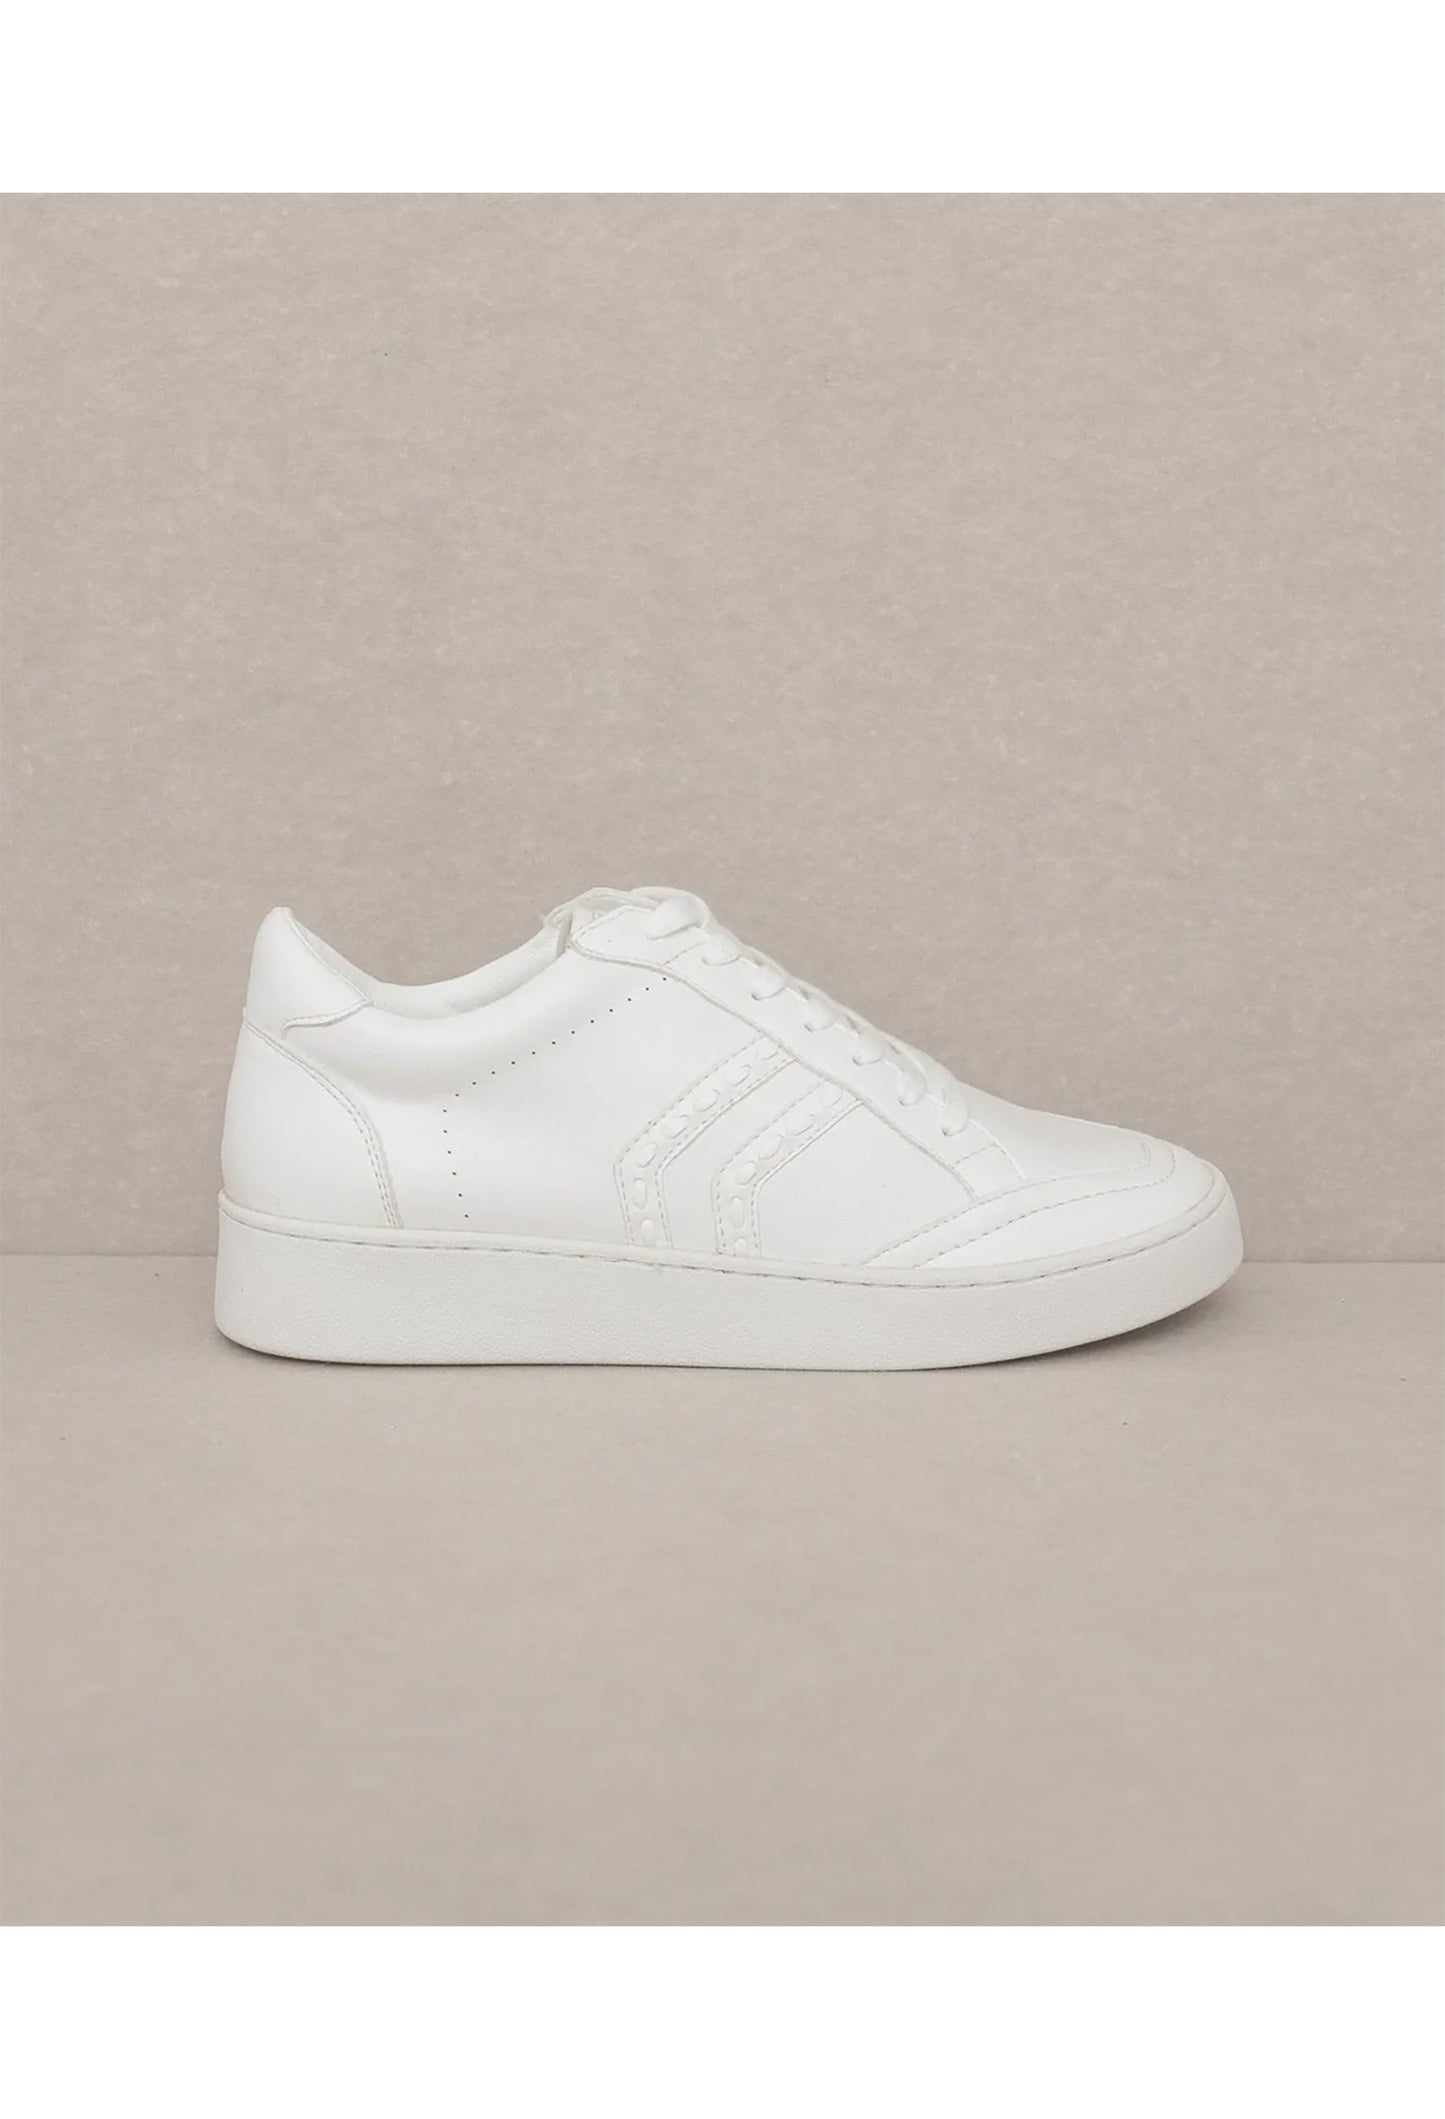 ellery lace up sneakers